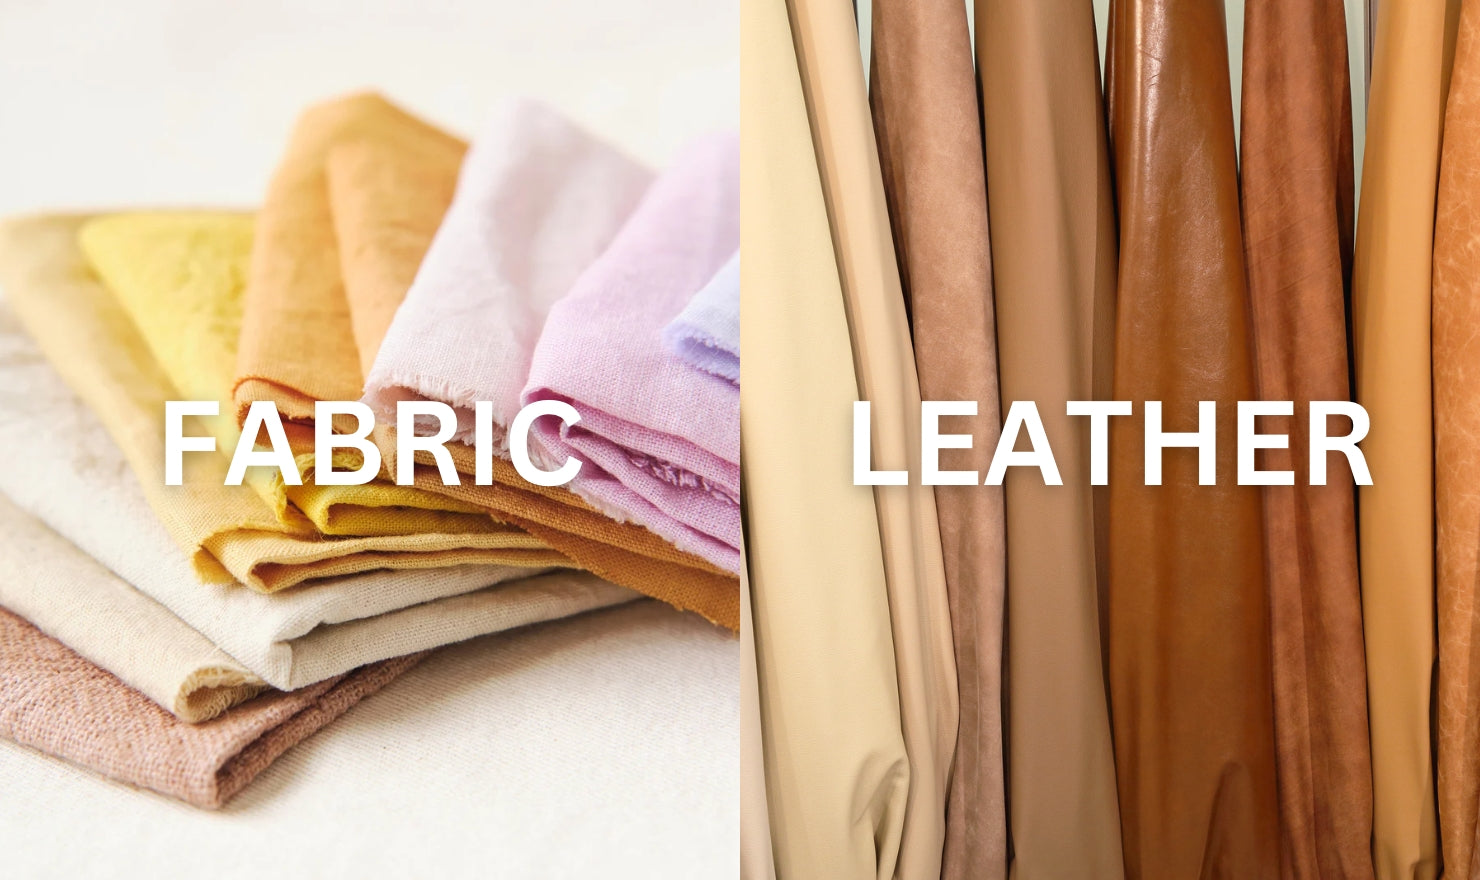 Choose the fabric or leather for your lifestyle